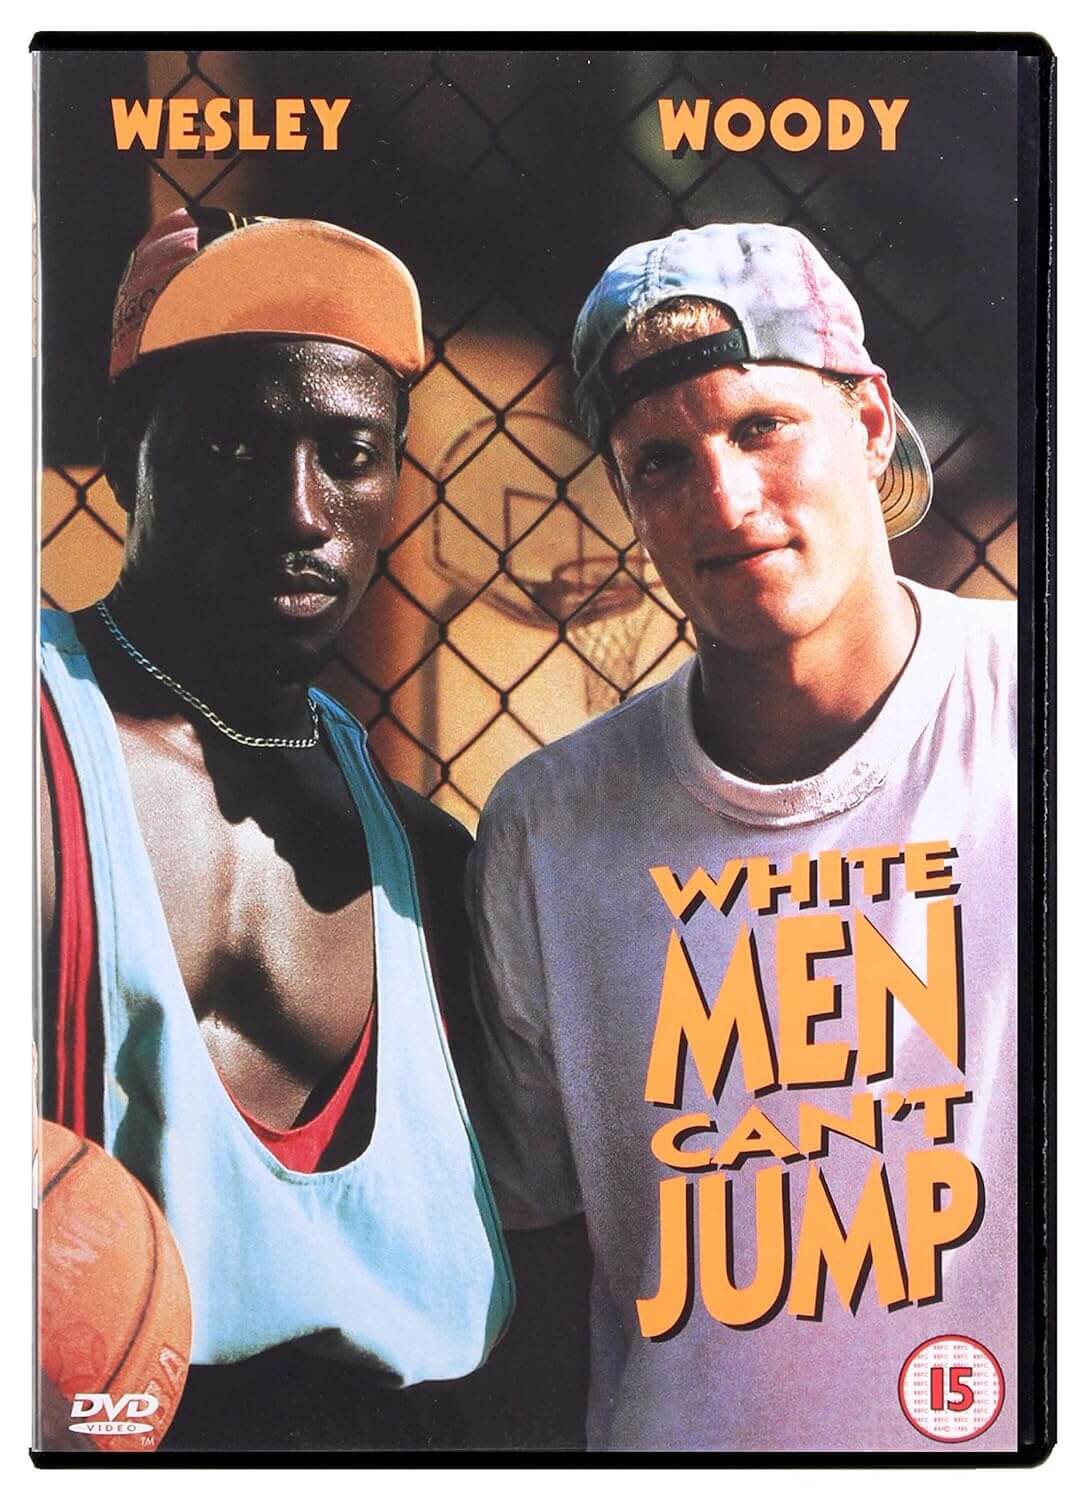 "White Men Can't Jump" (1992)